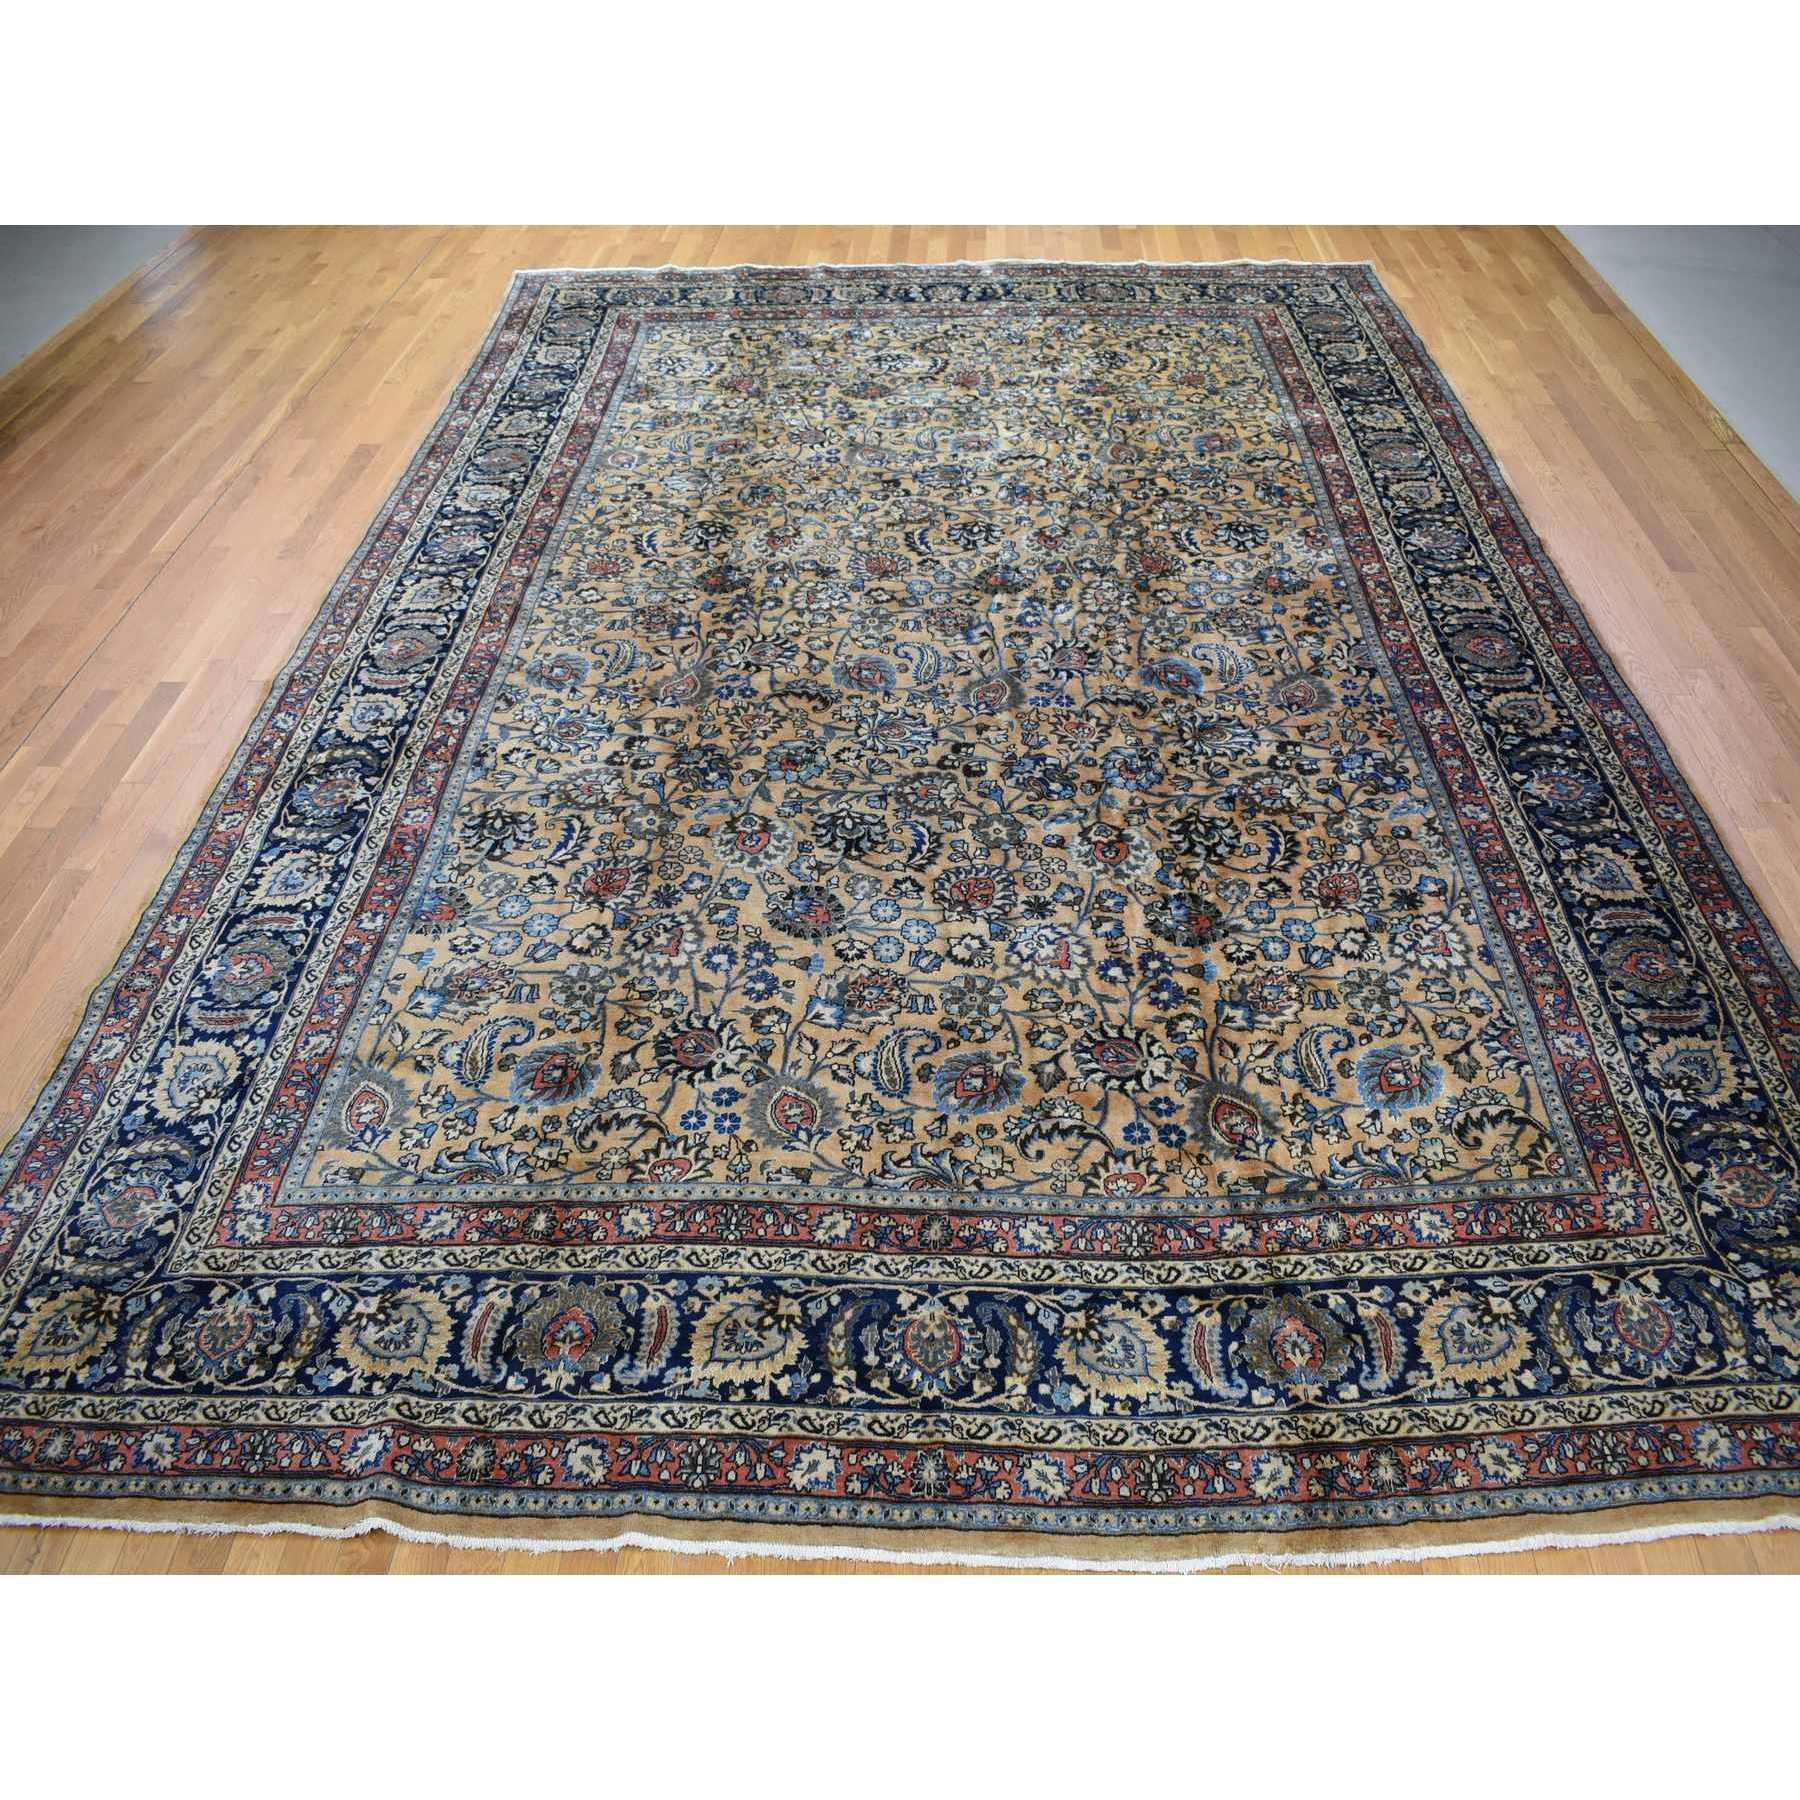 This fabulous Hand-Knotted carpet has been created and designed for extra strength and durability. This rug has been handcrafted for weeks in the traditional method that is used to make
Exact rug size in feet and inches : 11'9